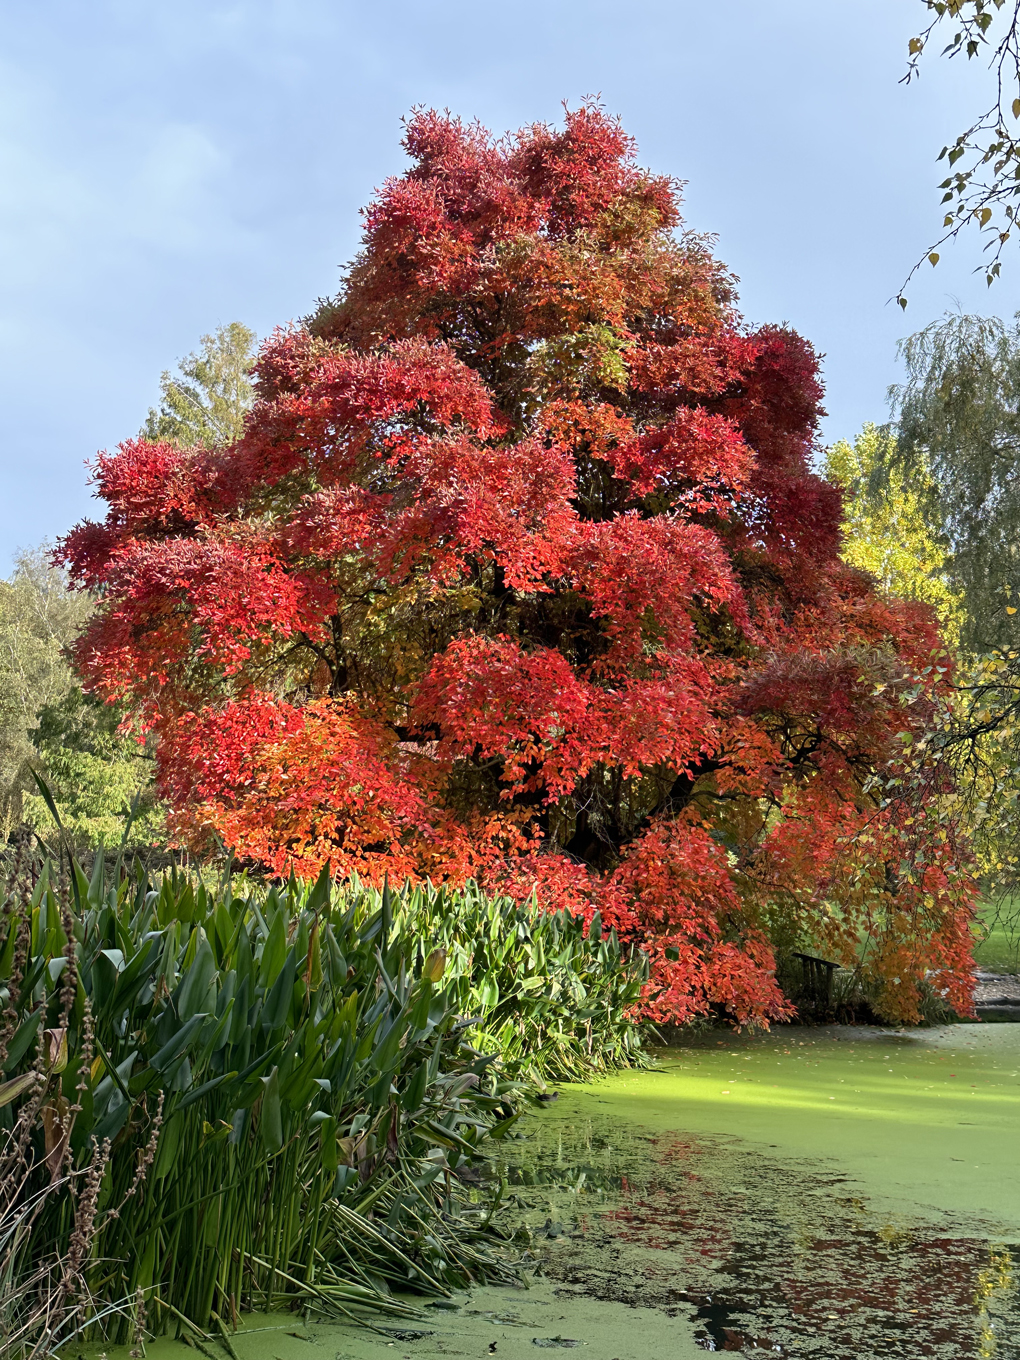 We see a striking red autumn tree in Richmond Park South West London